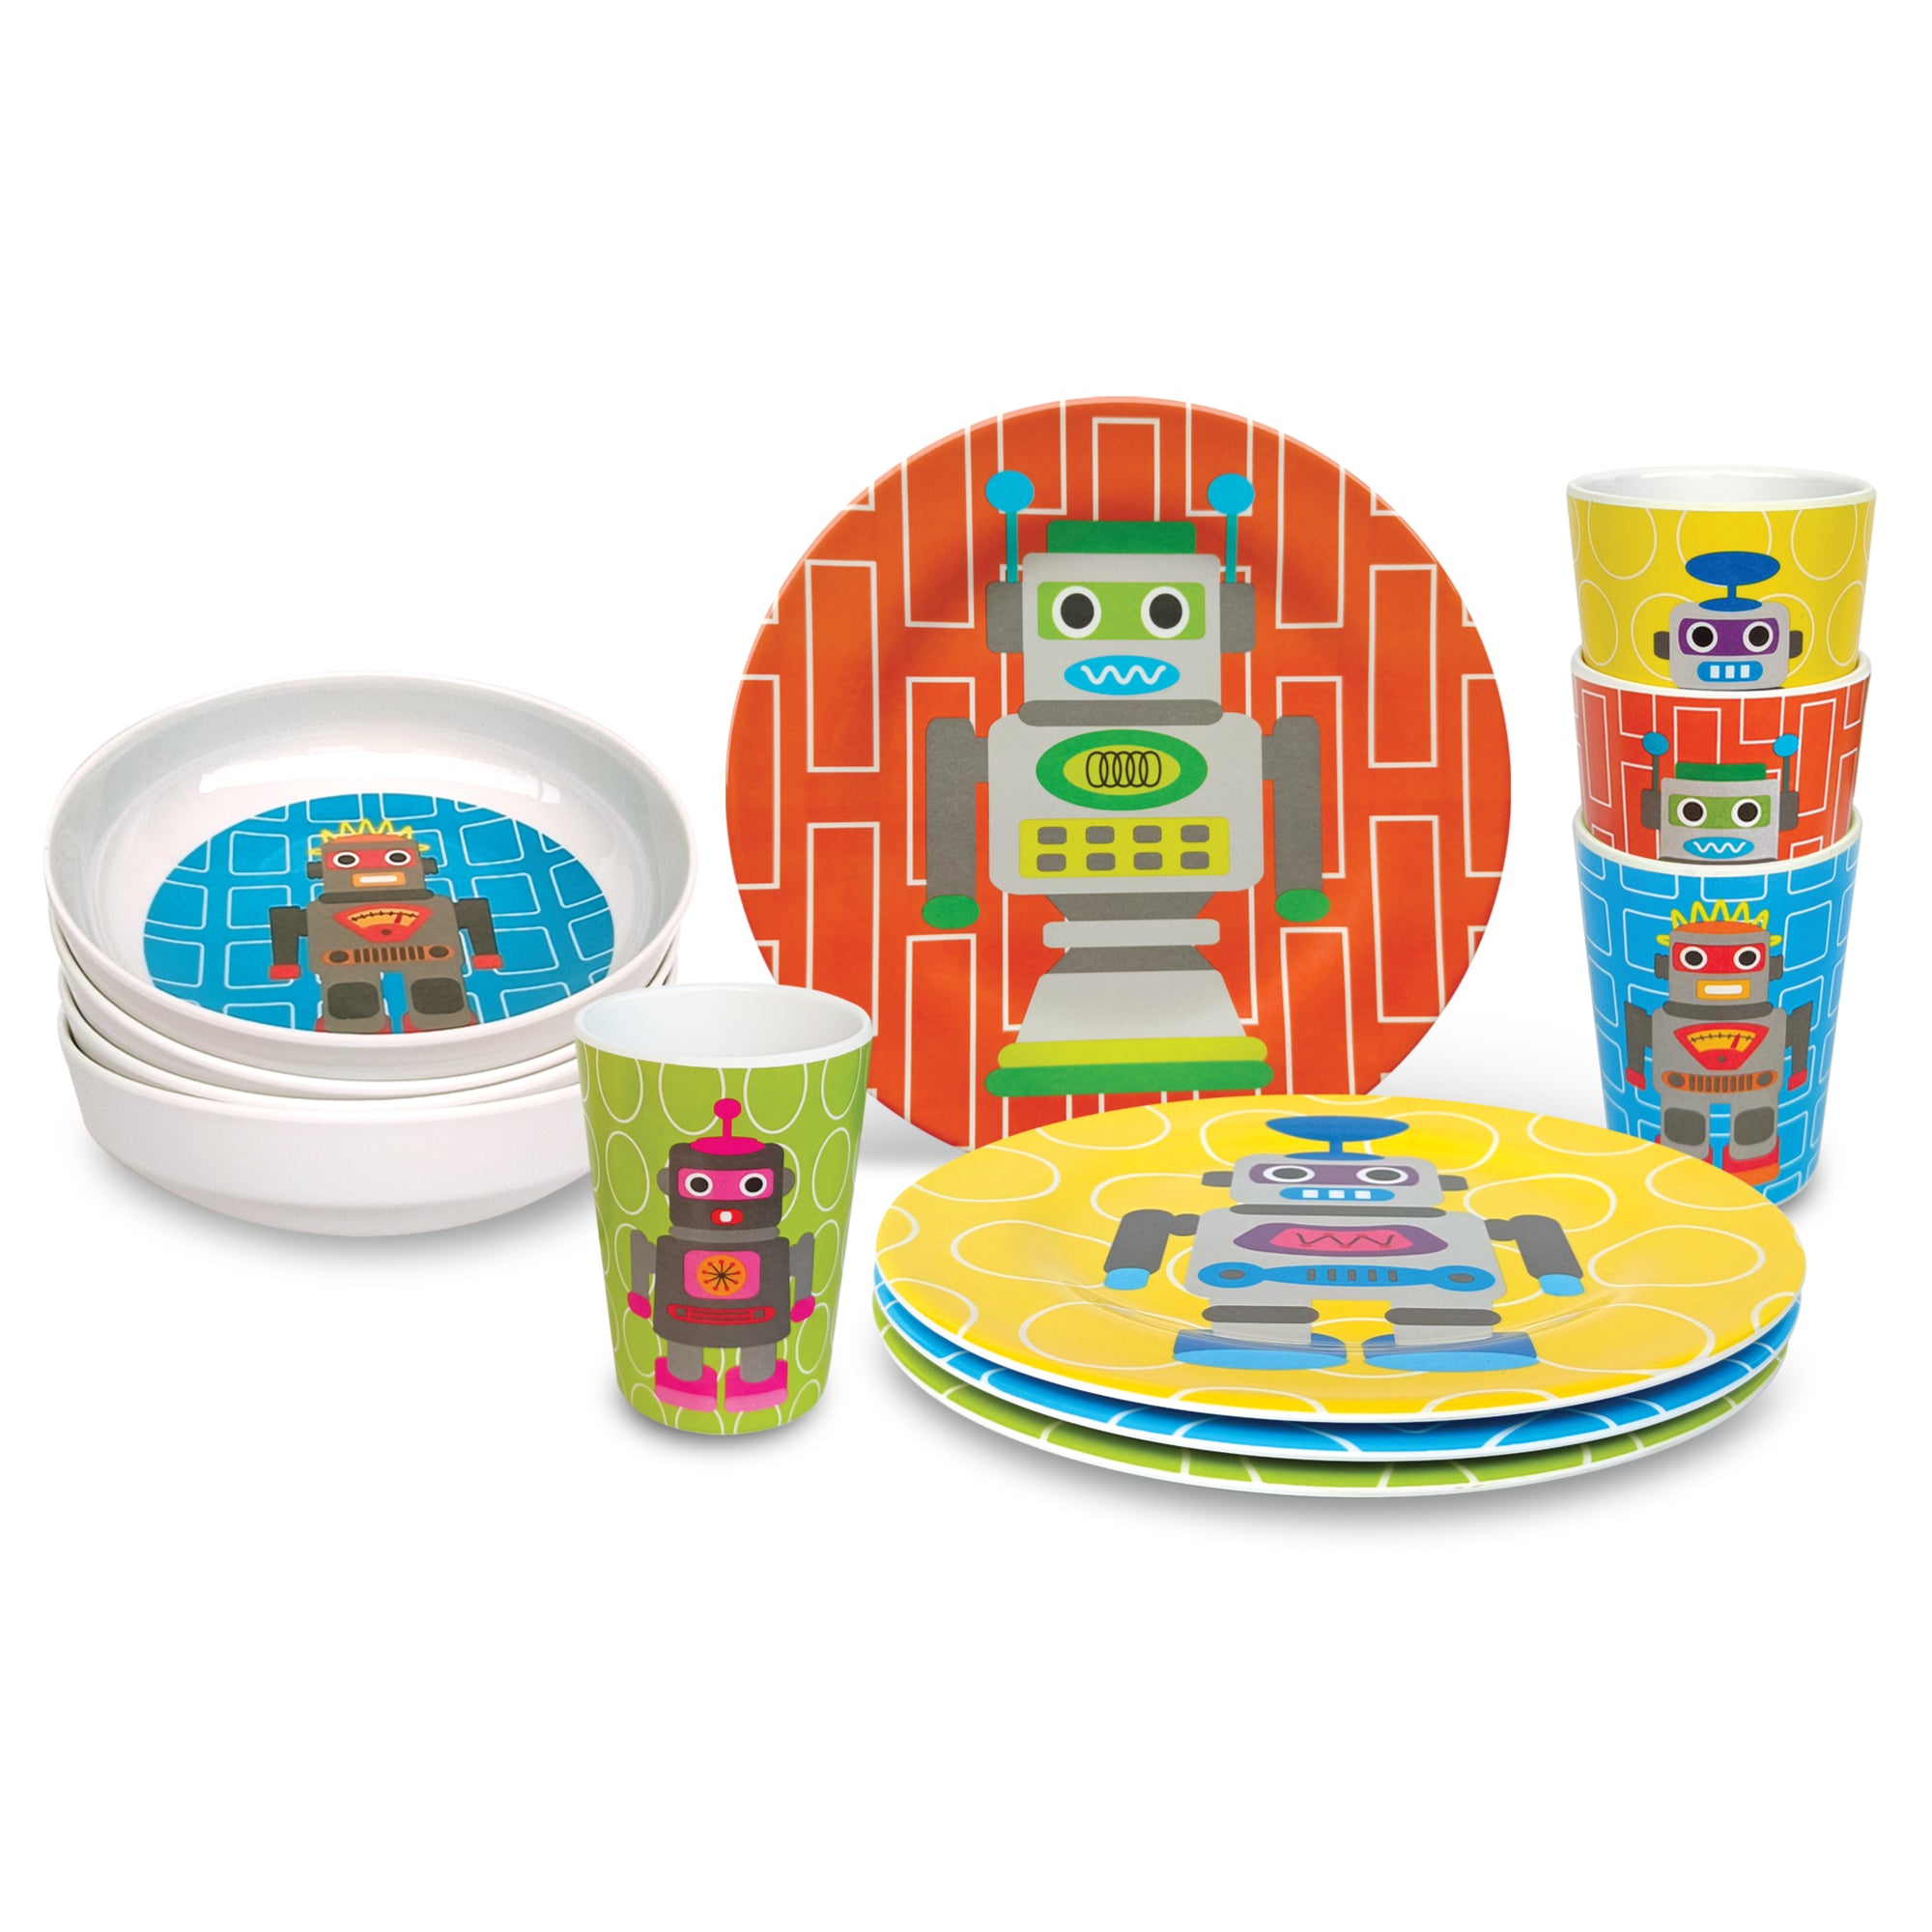 Pinpoint revidere Måling Robot Kids Plate Set - French Bull